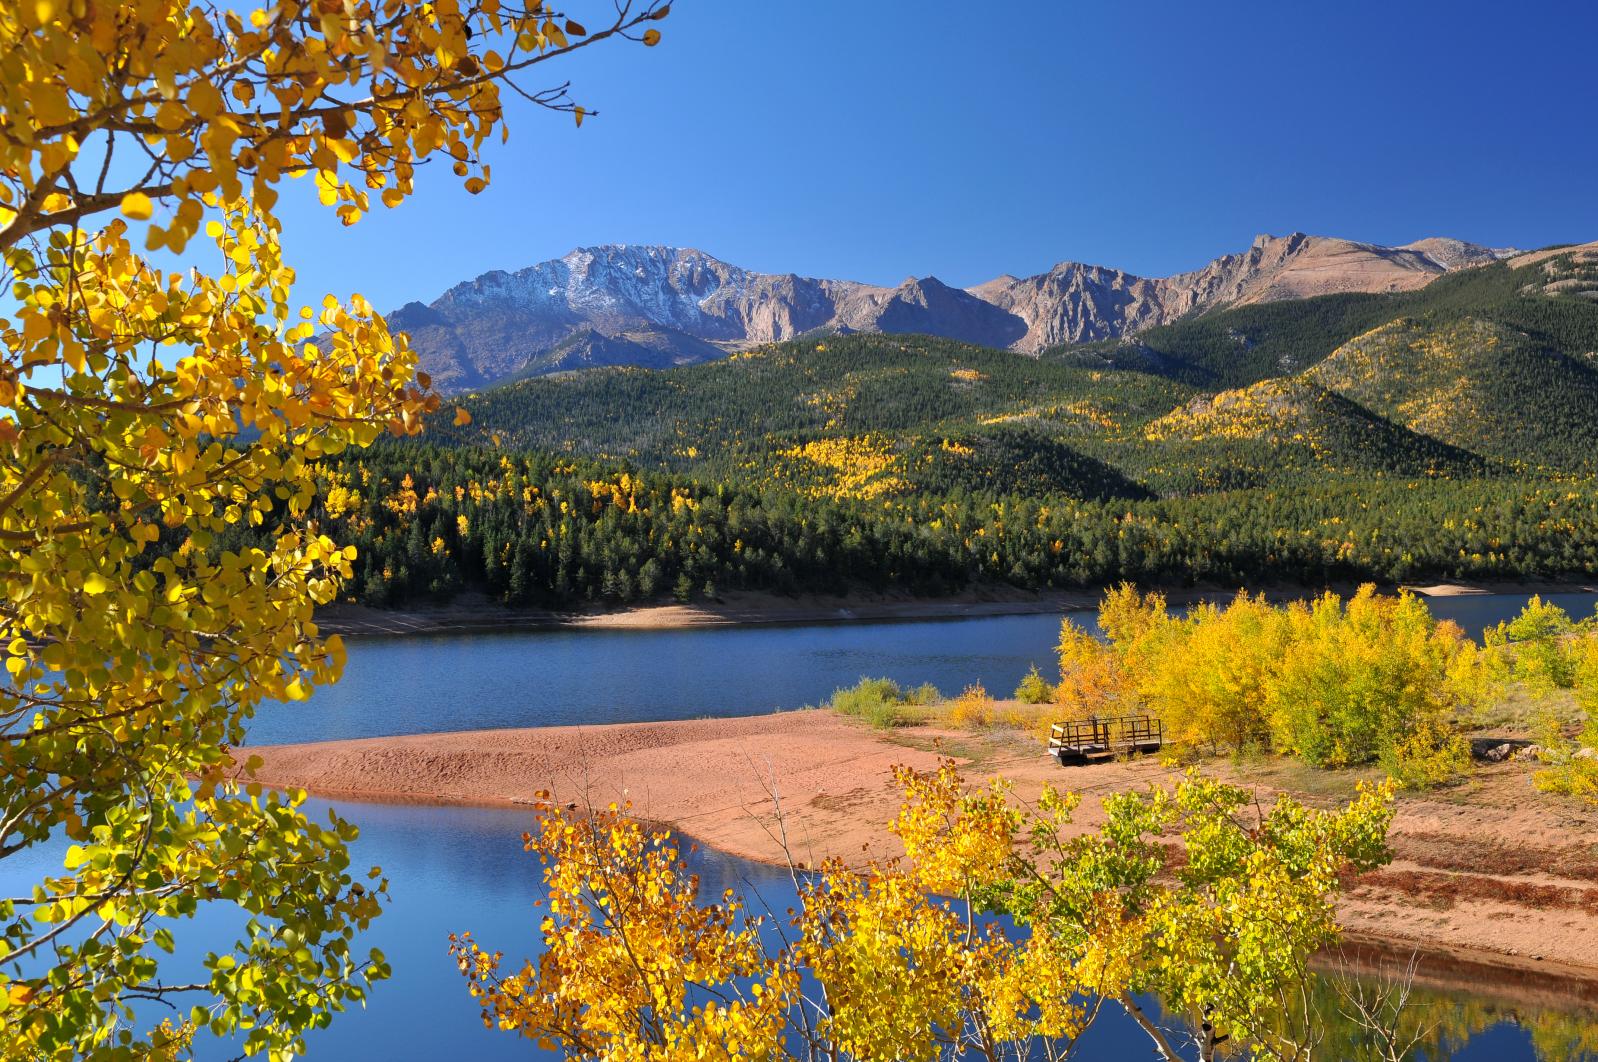 Mountain and lake in the fall